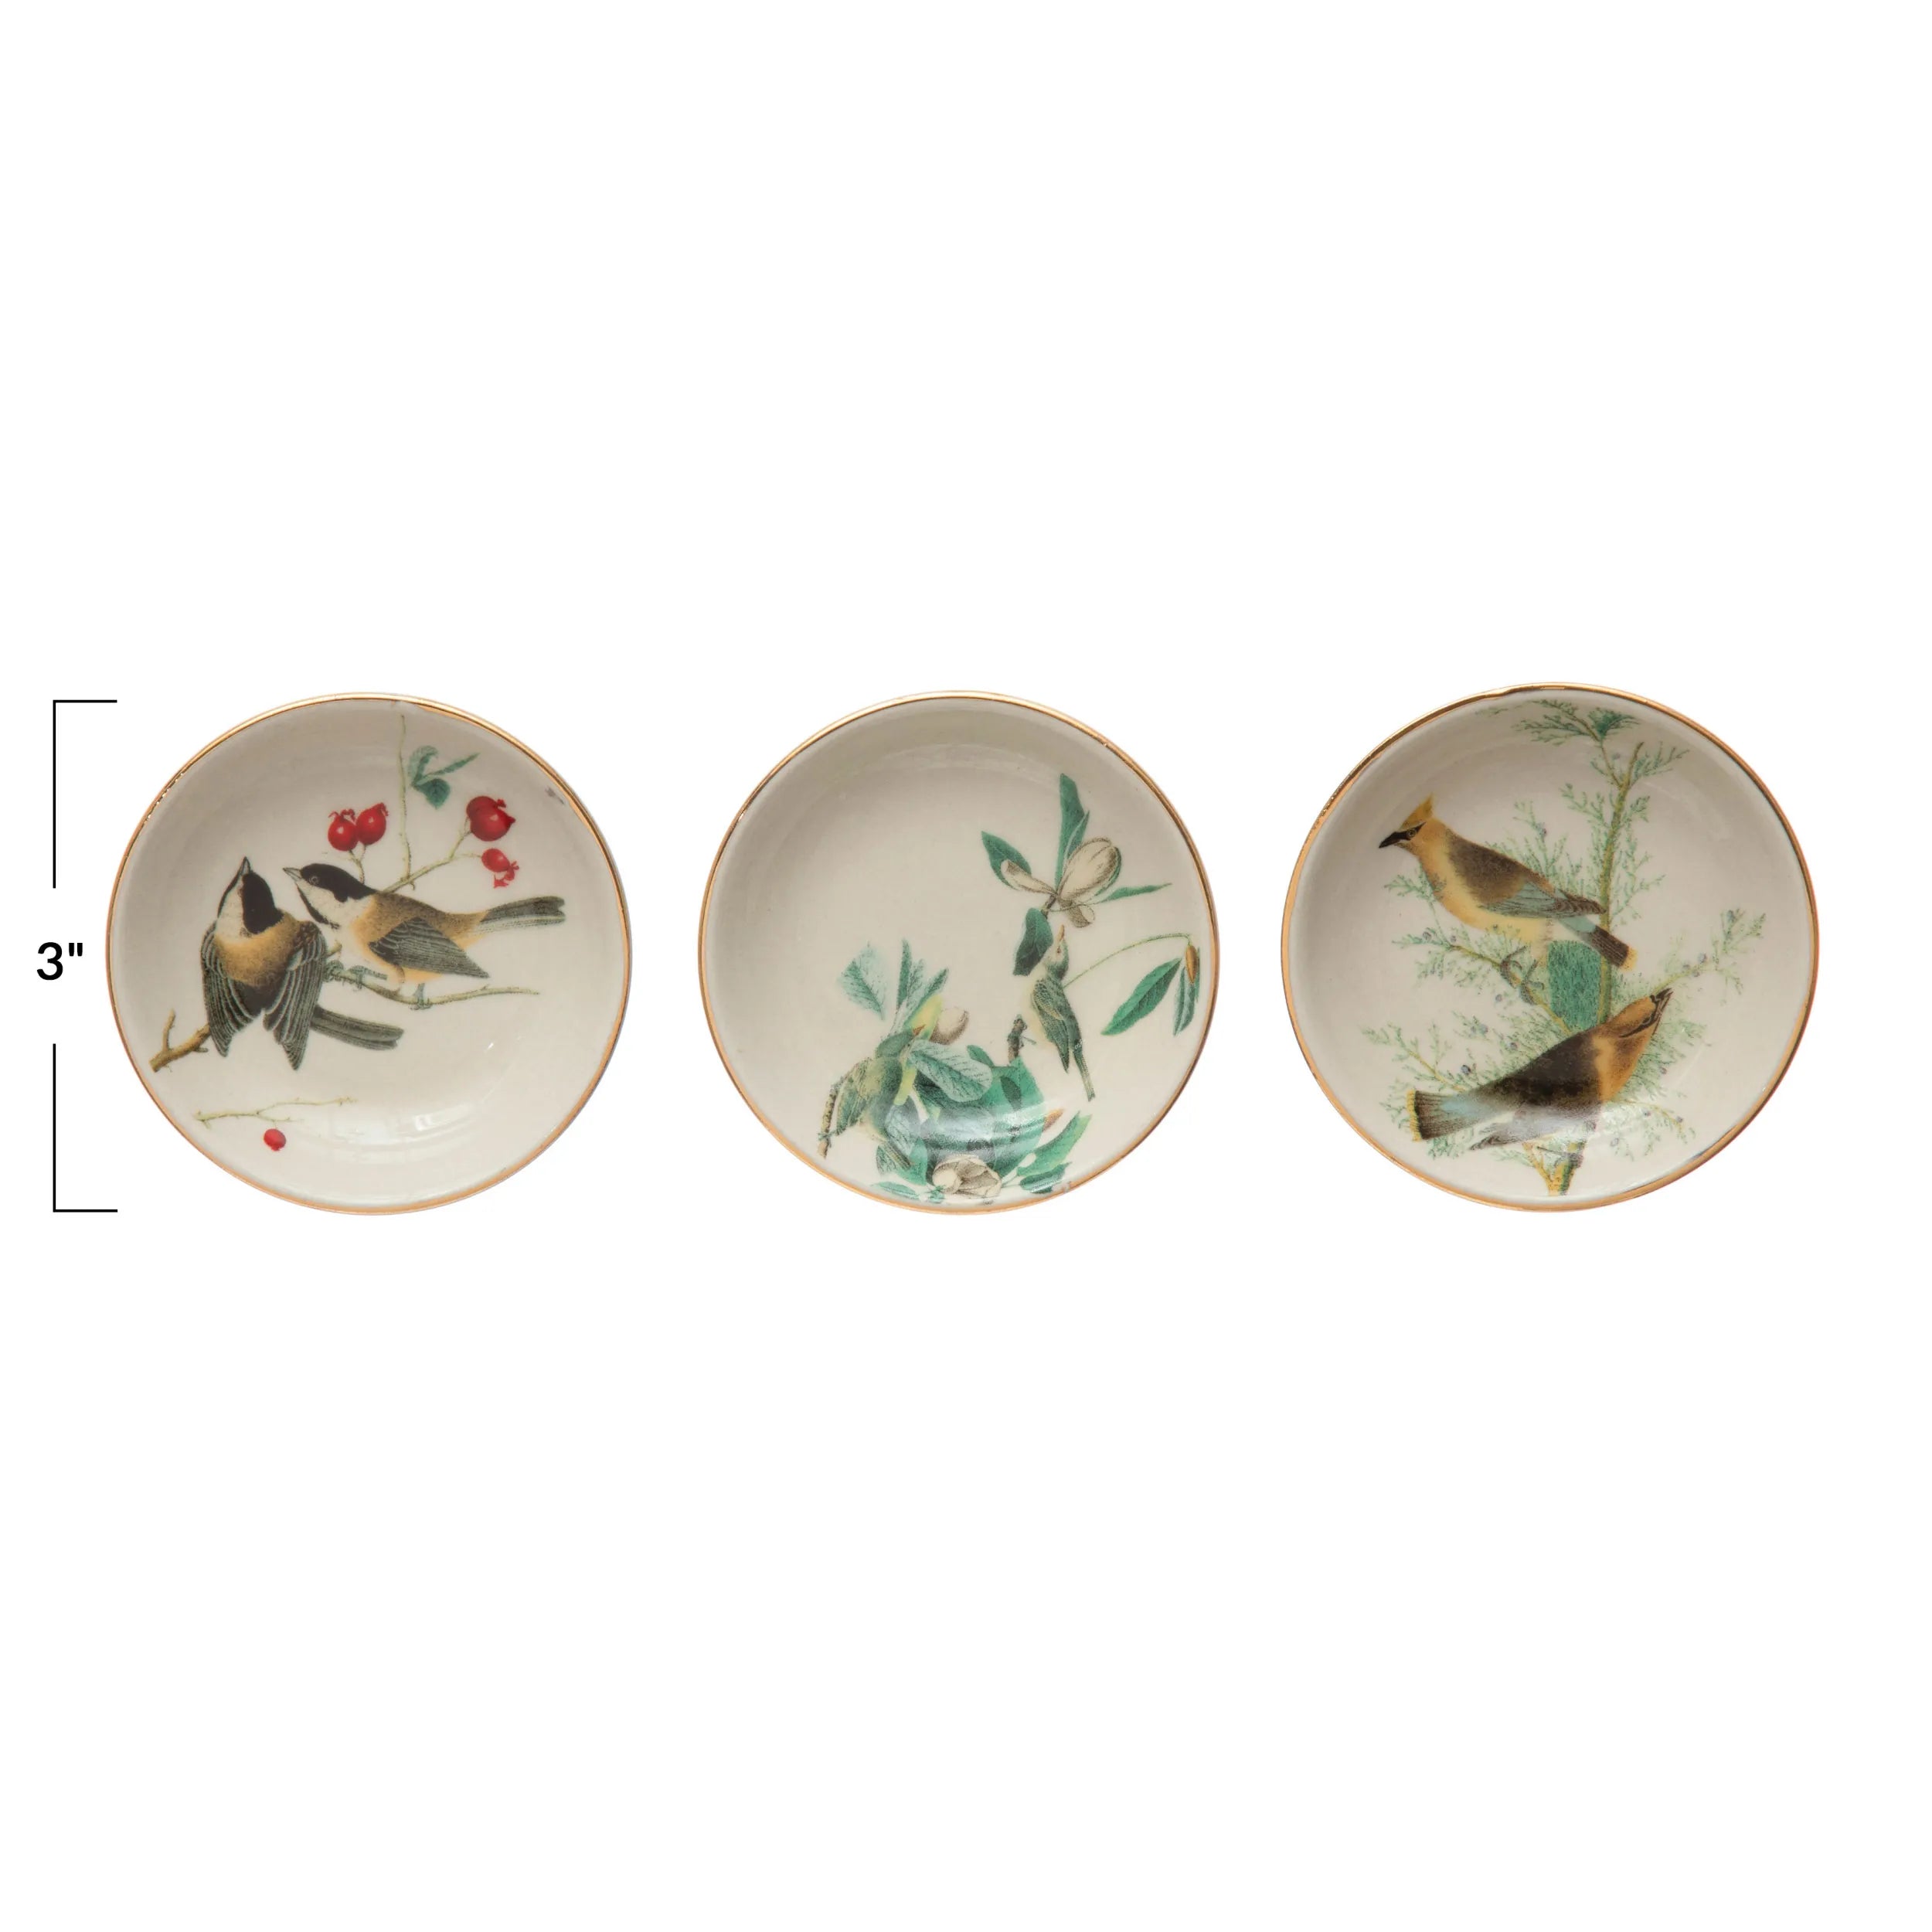 Vintage style plates with birds showing size of 3" round.